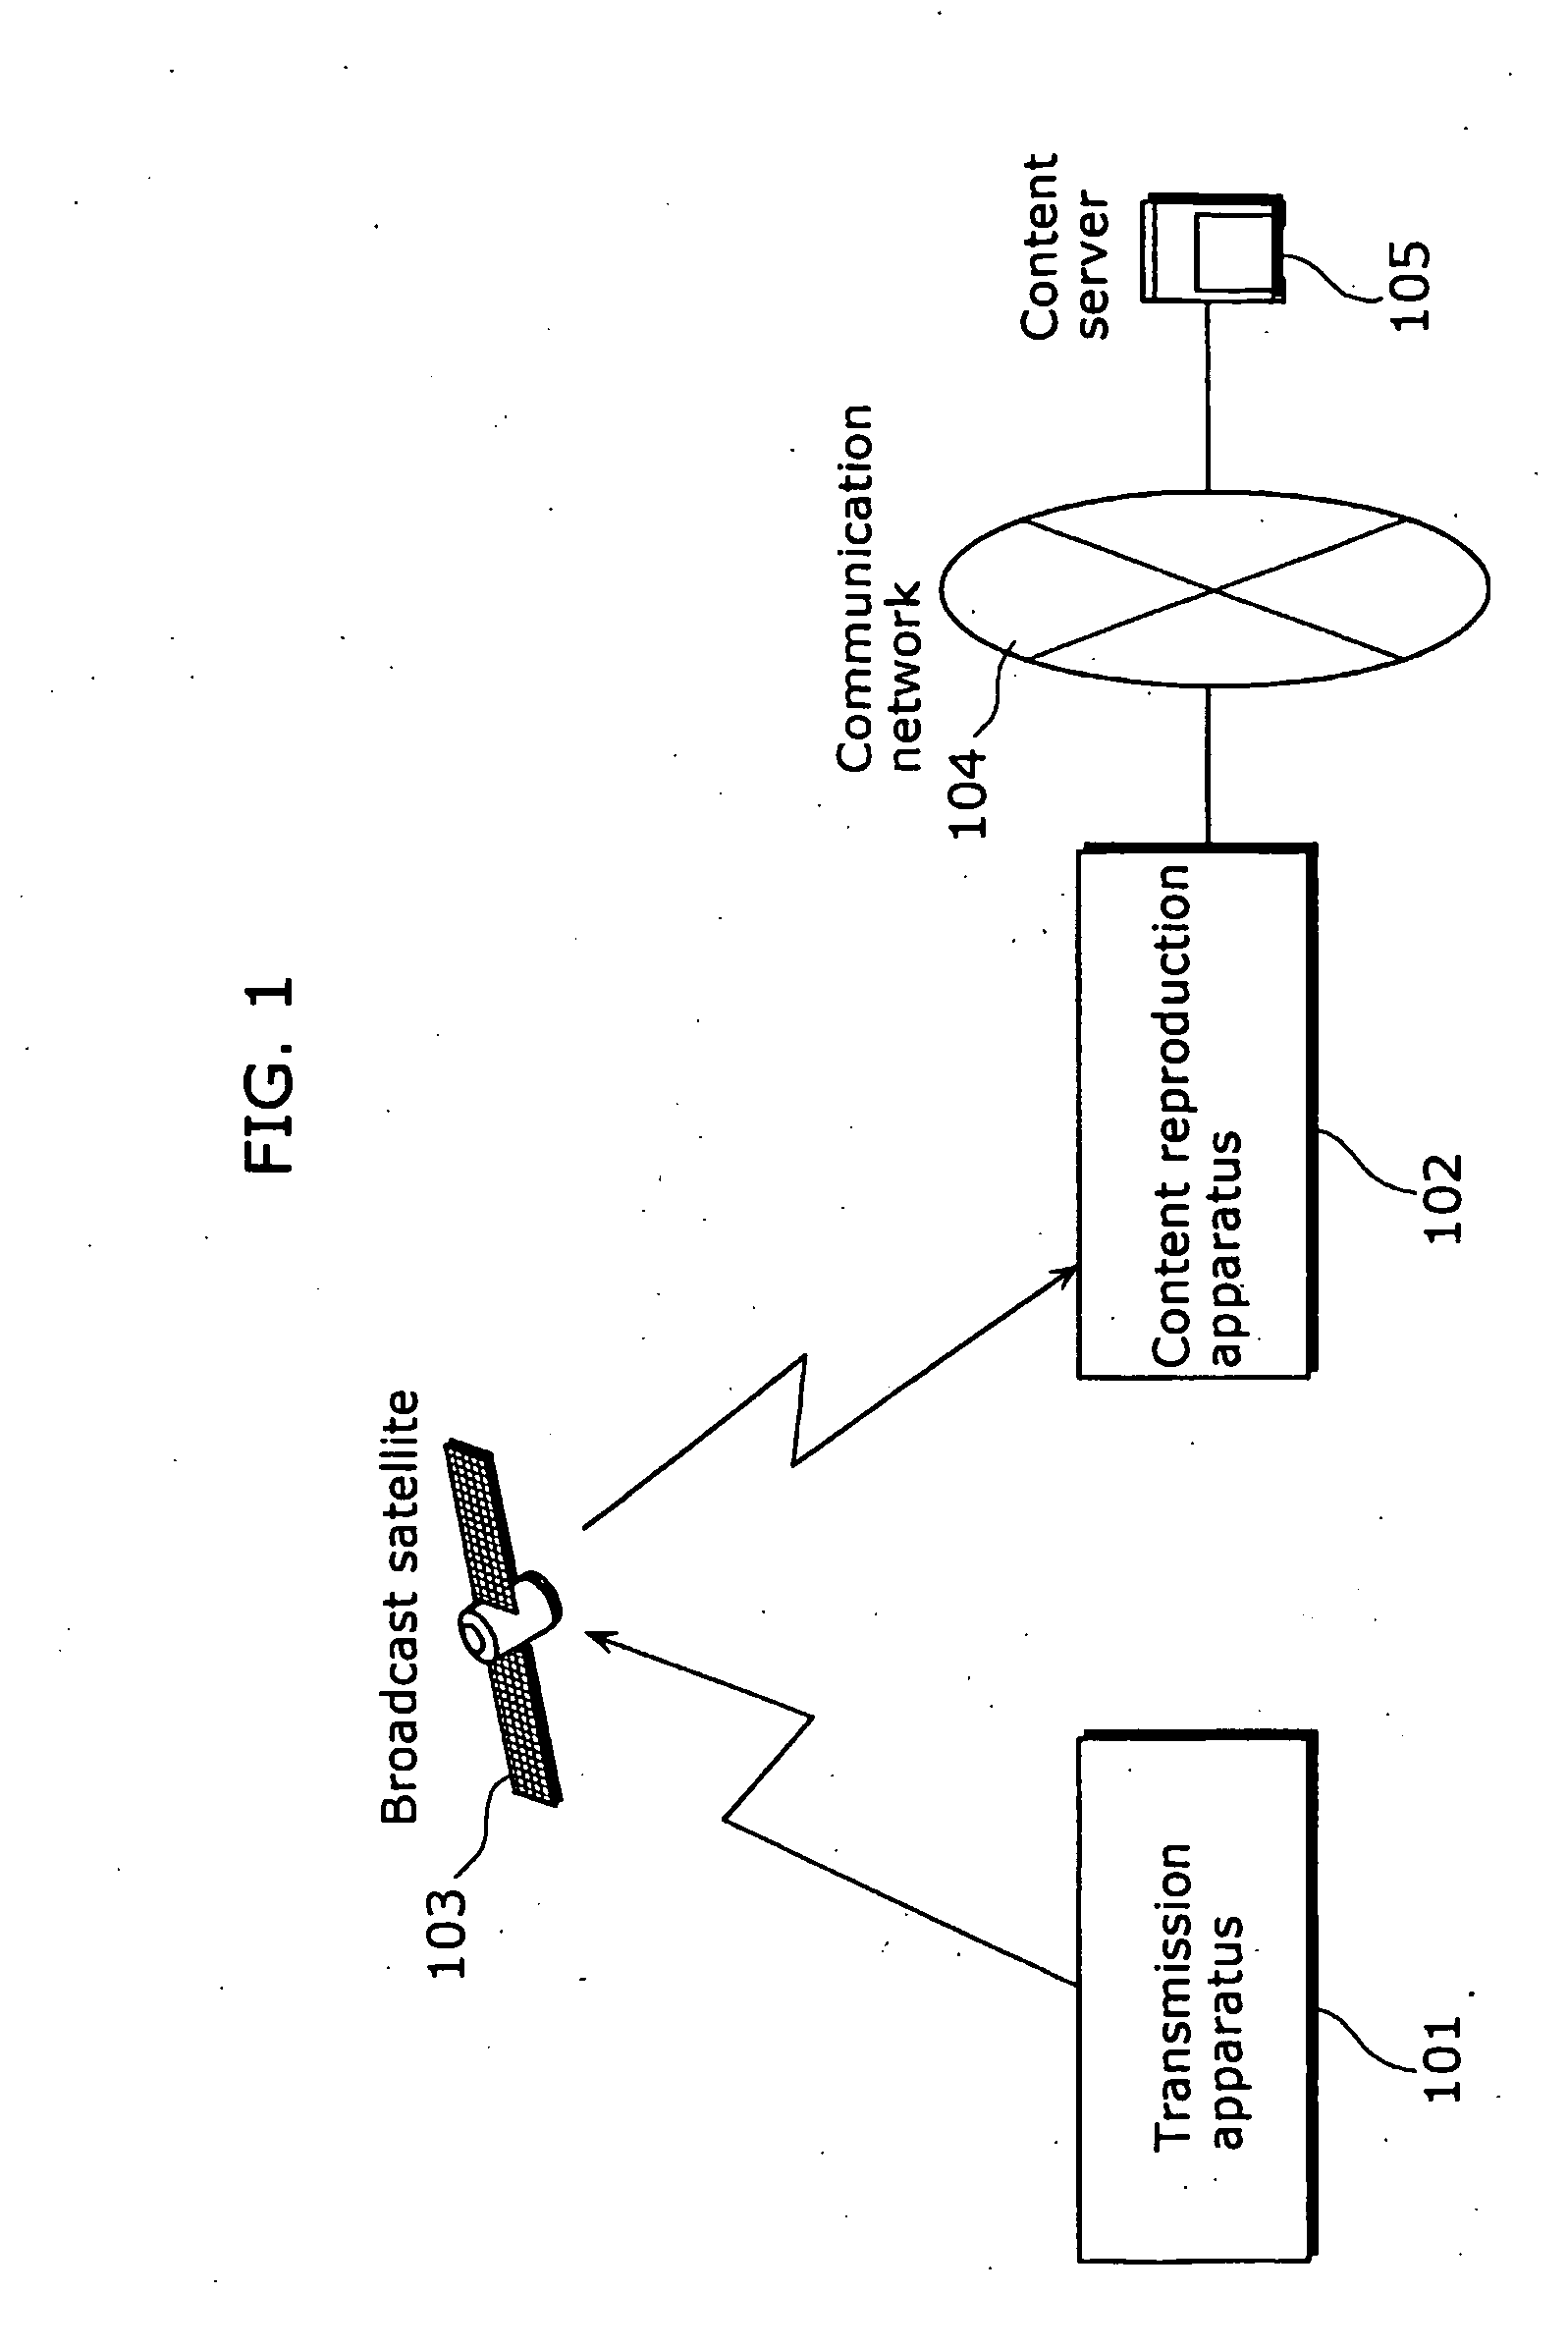 Transmission Apparatus, Content Reproduction Apparatus, and Content and License Distribution System